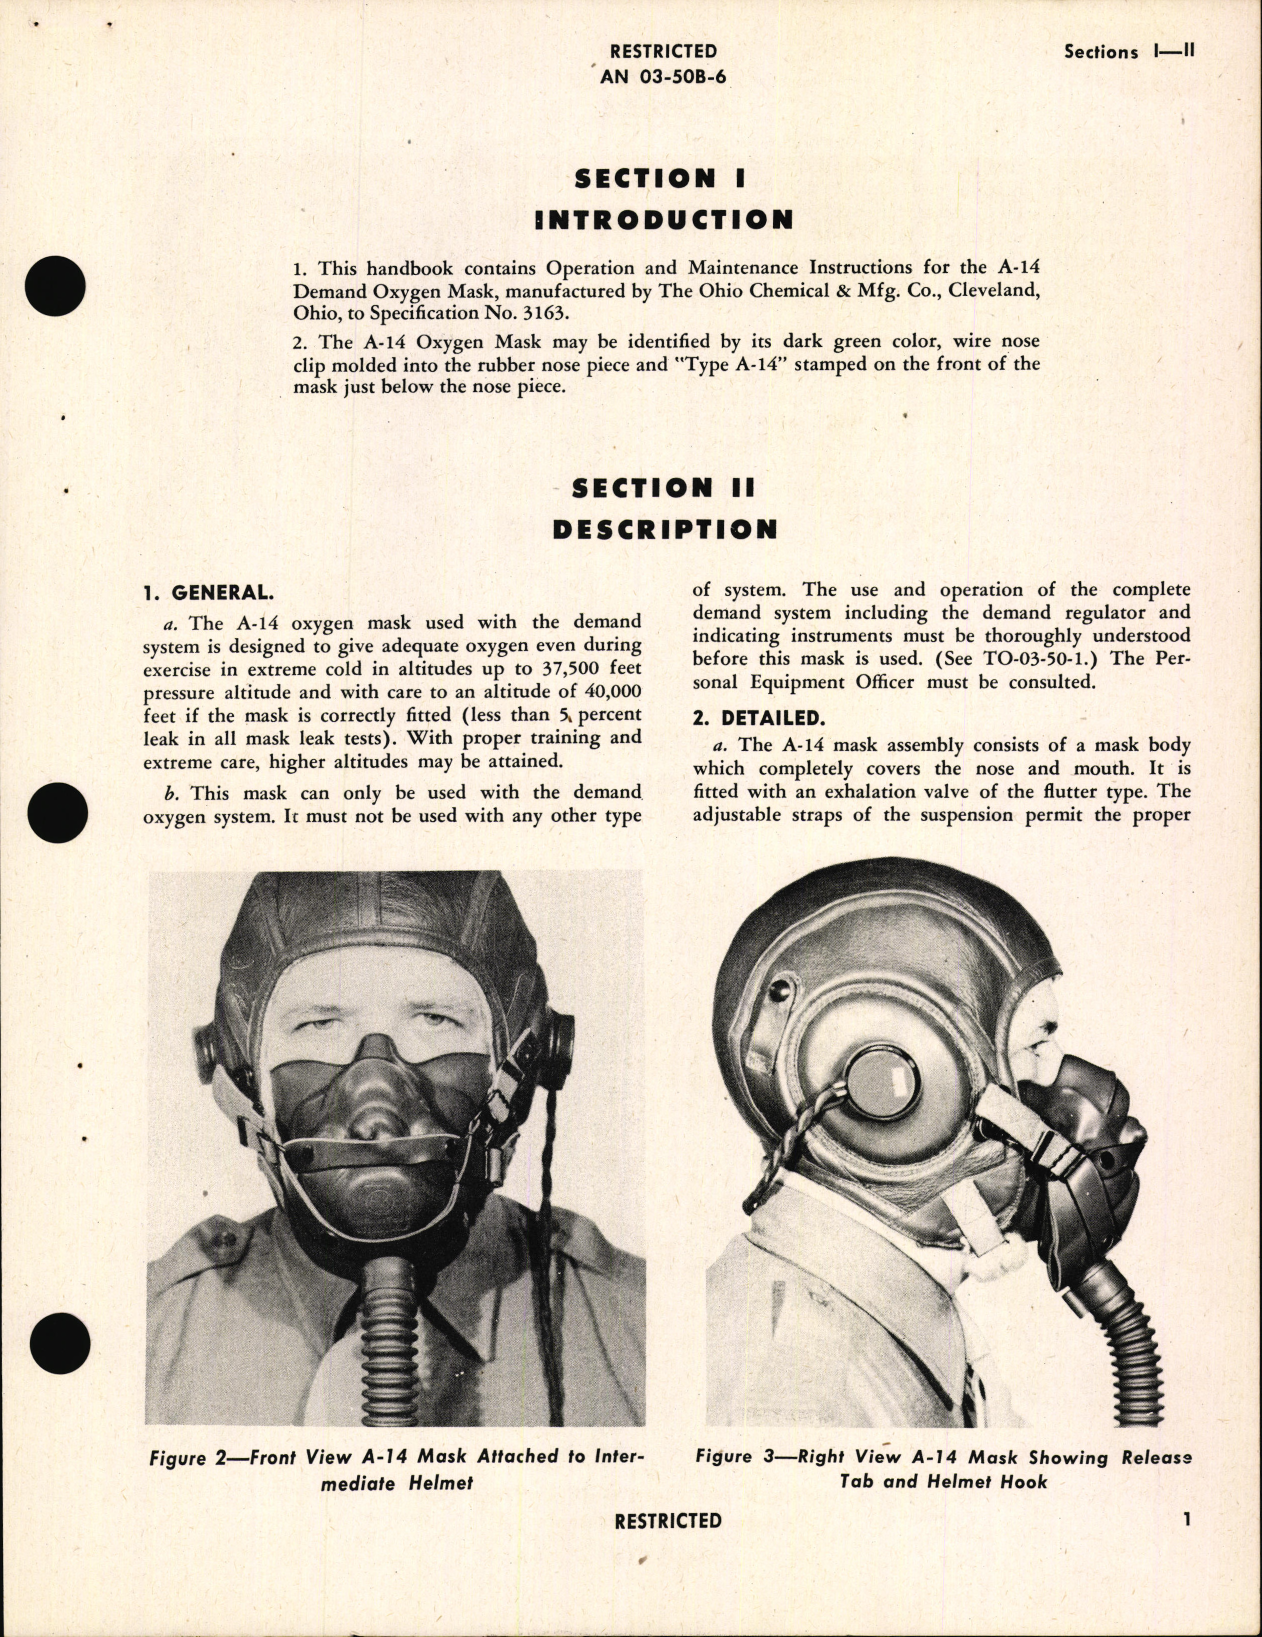 Sample page 5 from AirCorps Library document: Operation, Service and Overhaul Instructions with Parts Catalog for Demand Oxygen Mask Type A-14